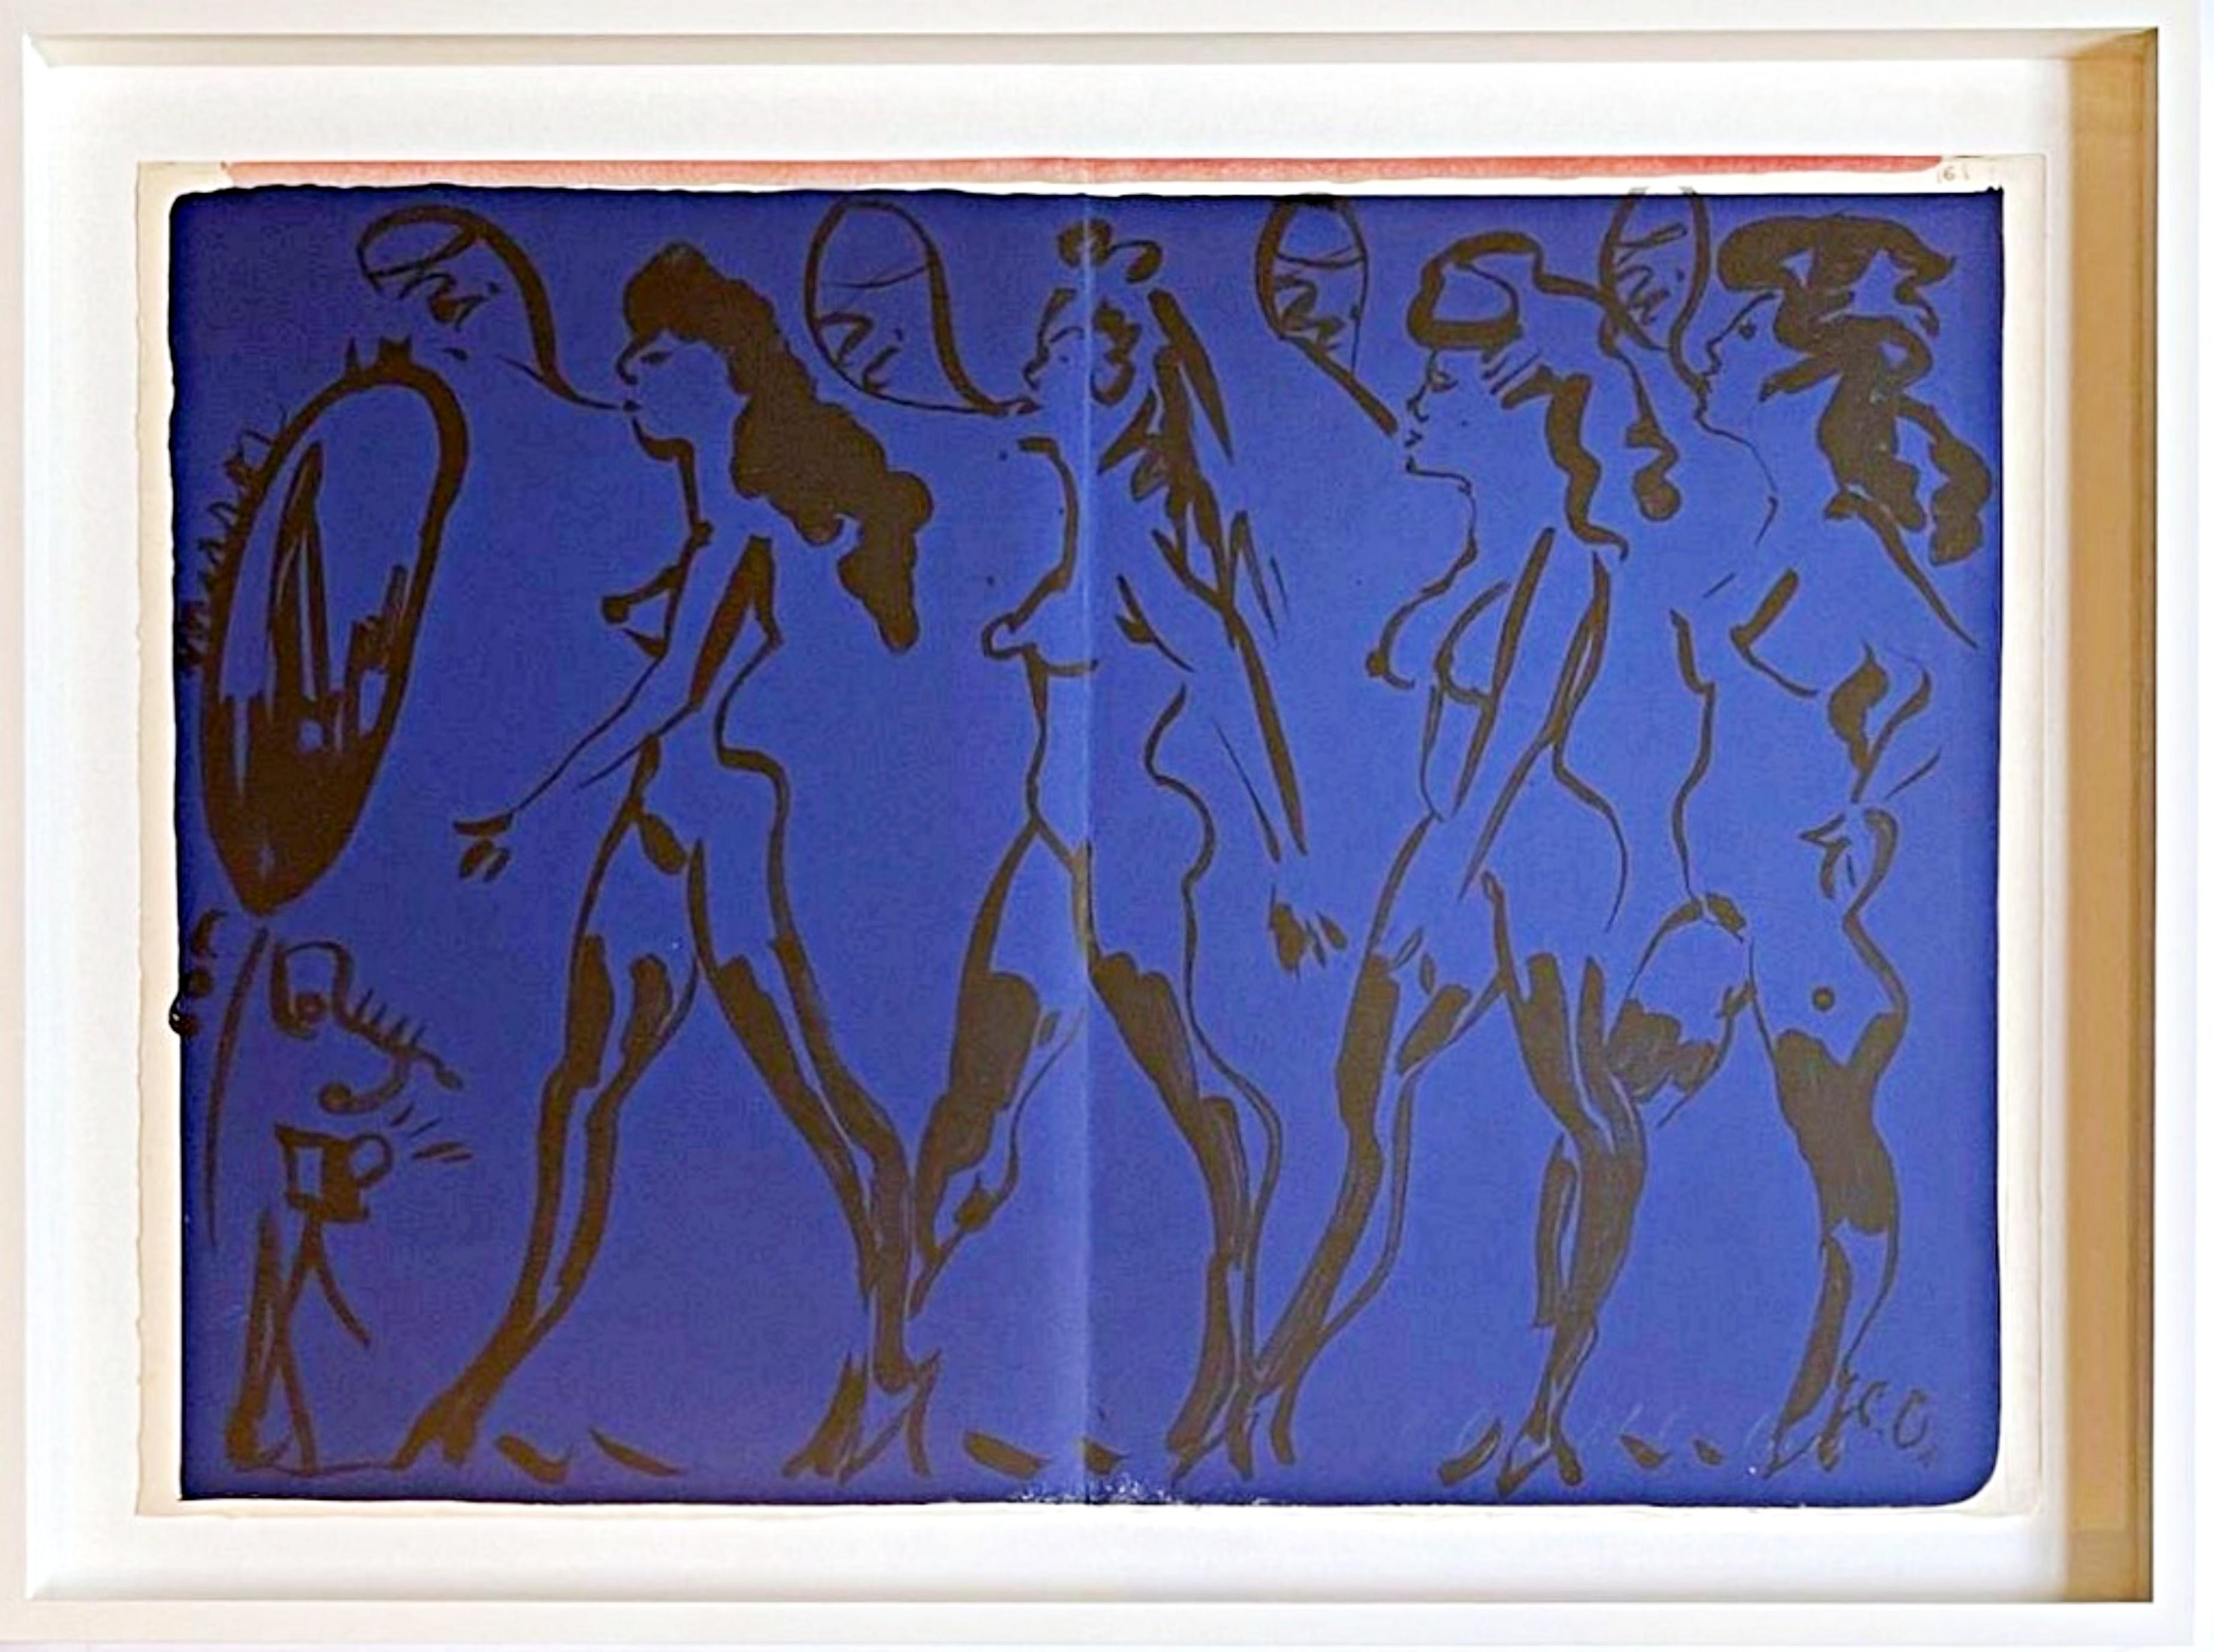 Claes Oldenburg Nude Print - Parade of Women, from Deluxe, Hand Signed, 85/100 1 Cent Life Portfolio, Framed